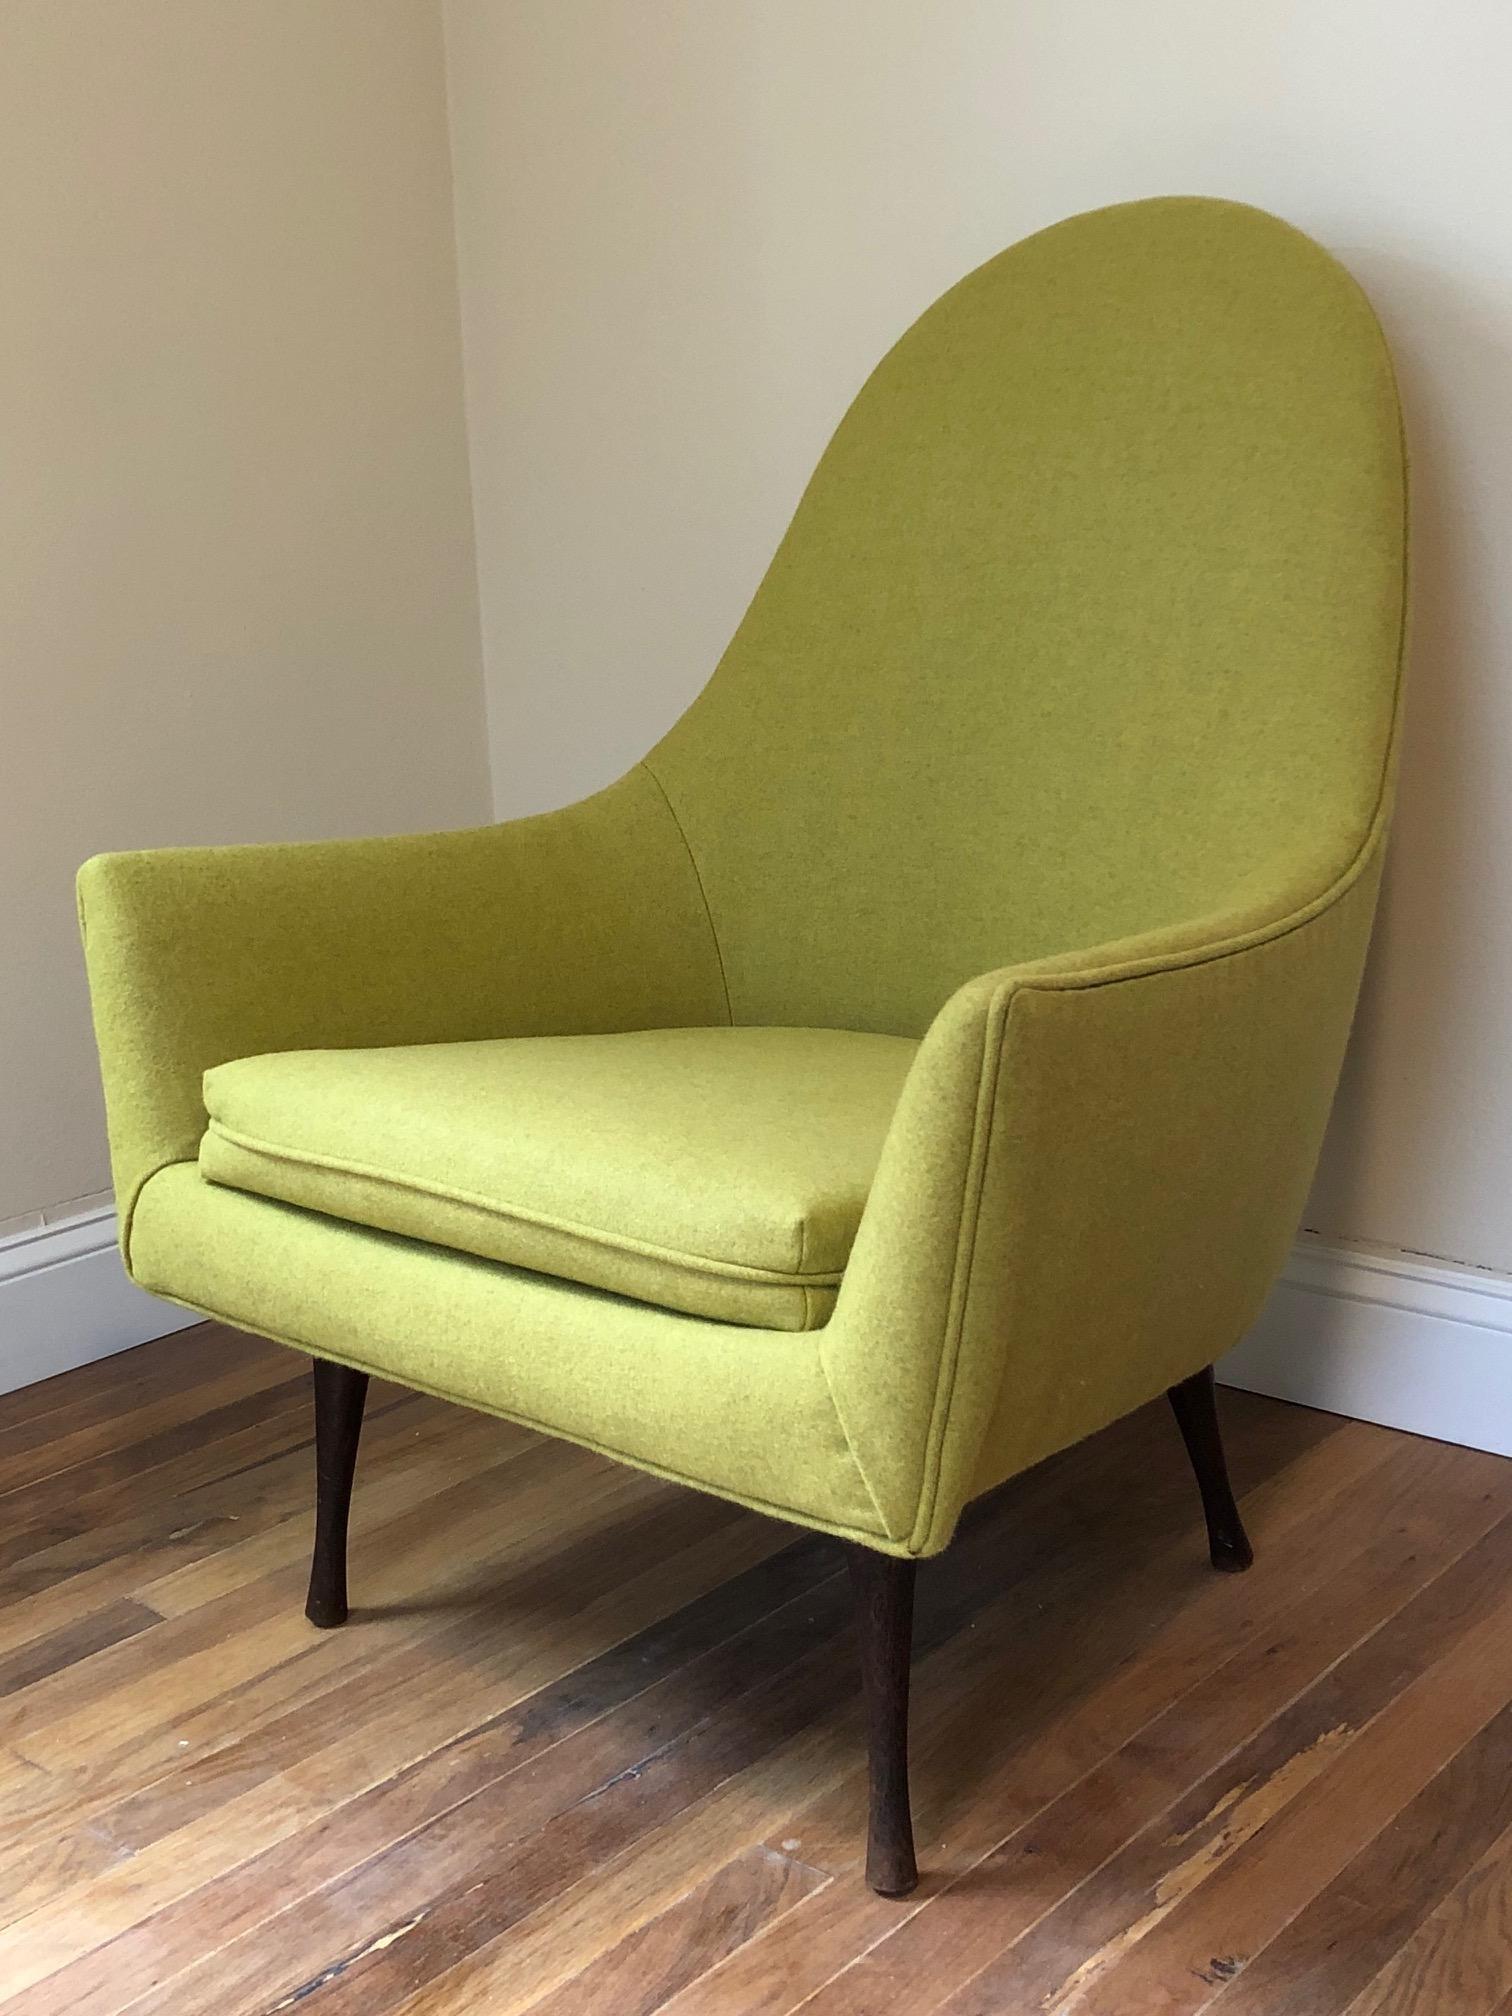 A Classic high back chair by Paul McCobb for Widdicomb. Shaped like a tall egg with unusual turned legs this chair has a great midcentury look and is very comfortable. Reupholstered in chartreuse wool.